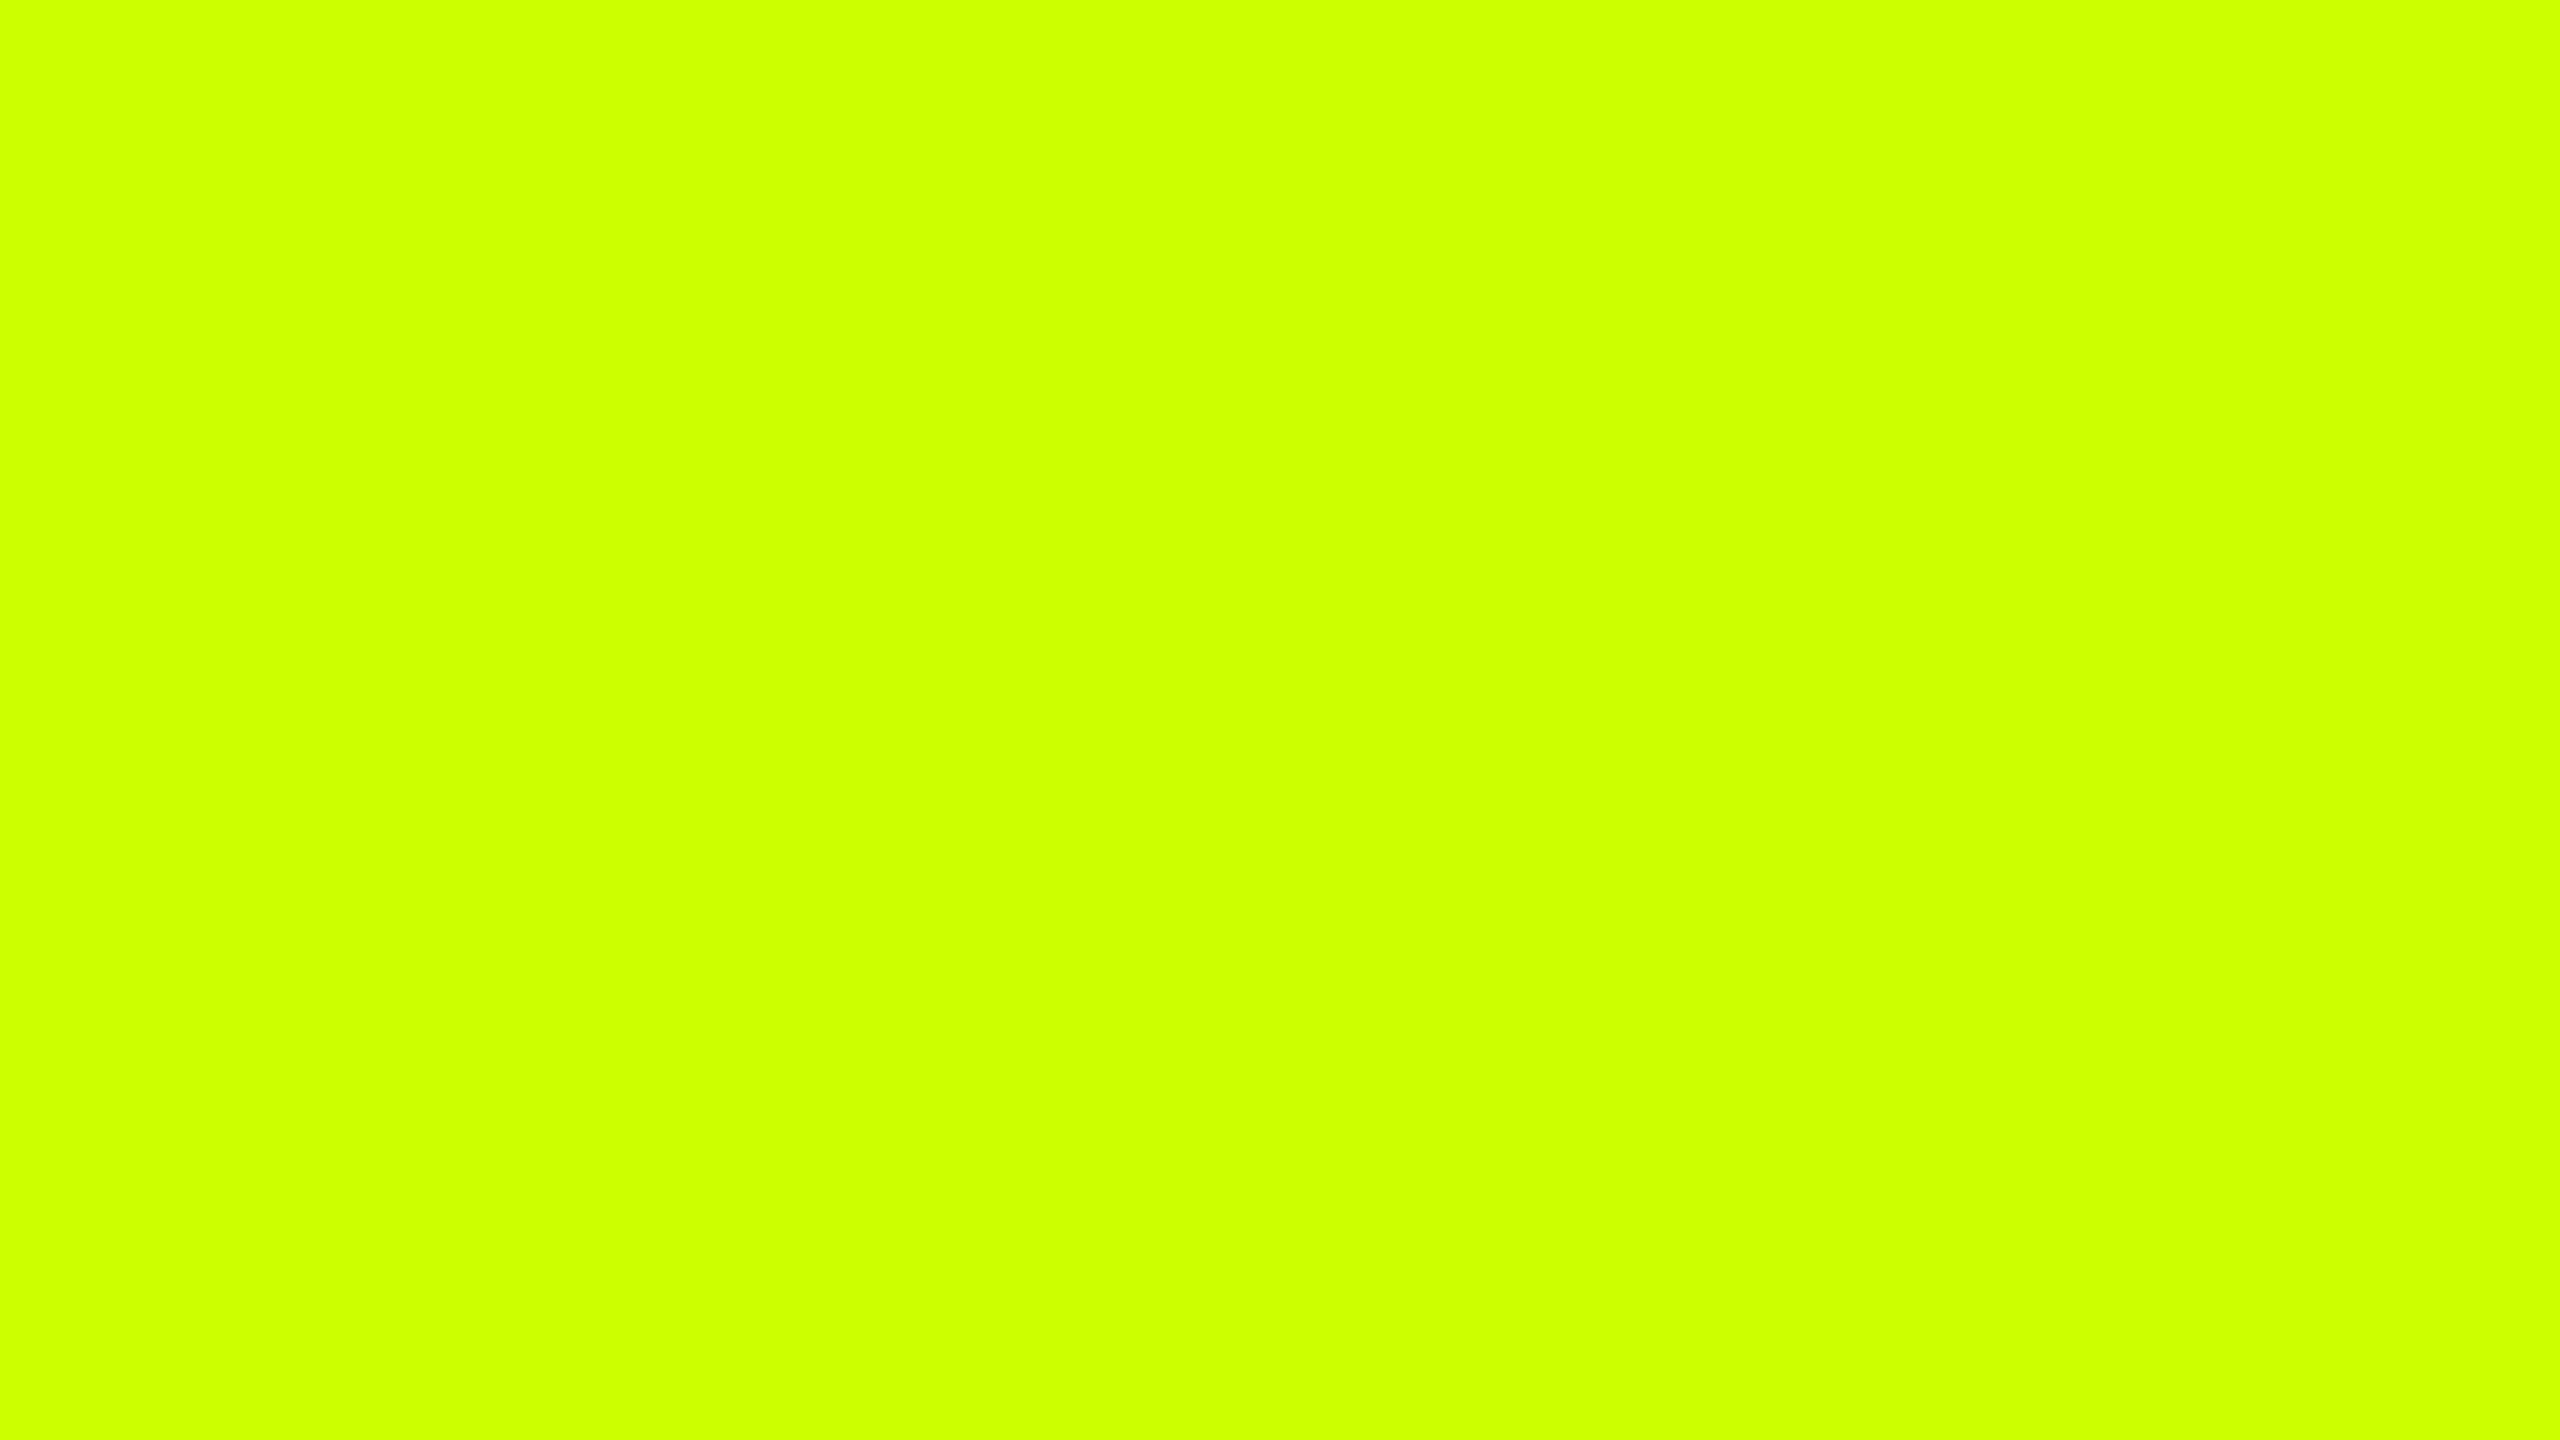  2560x1440 resolution Fluorescent Yellow solid color background 2560x1440